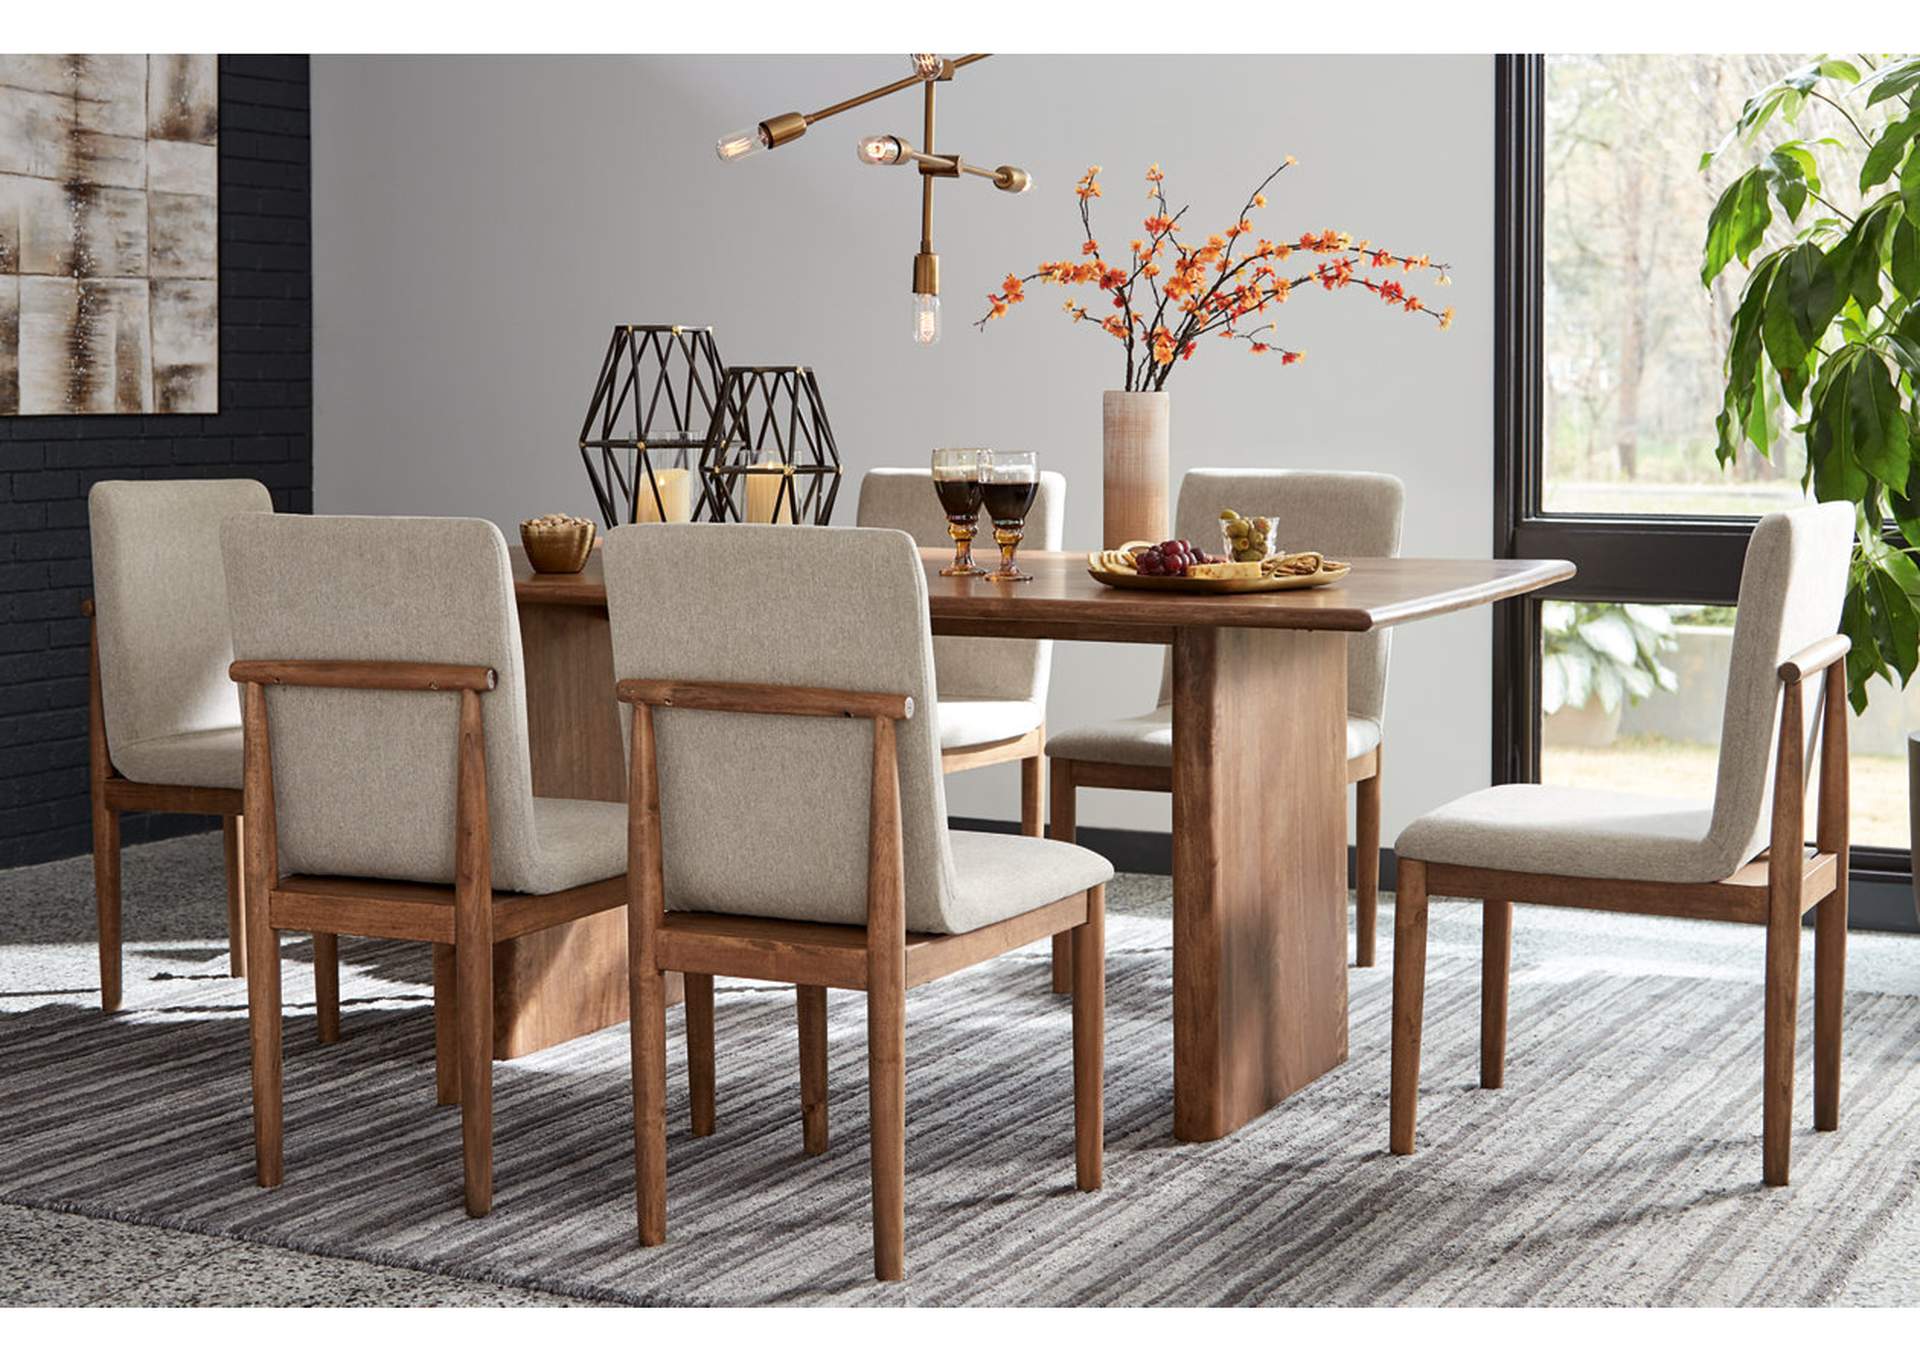 Isanti Dining Table and 6 Chairs,Millennium